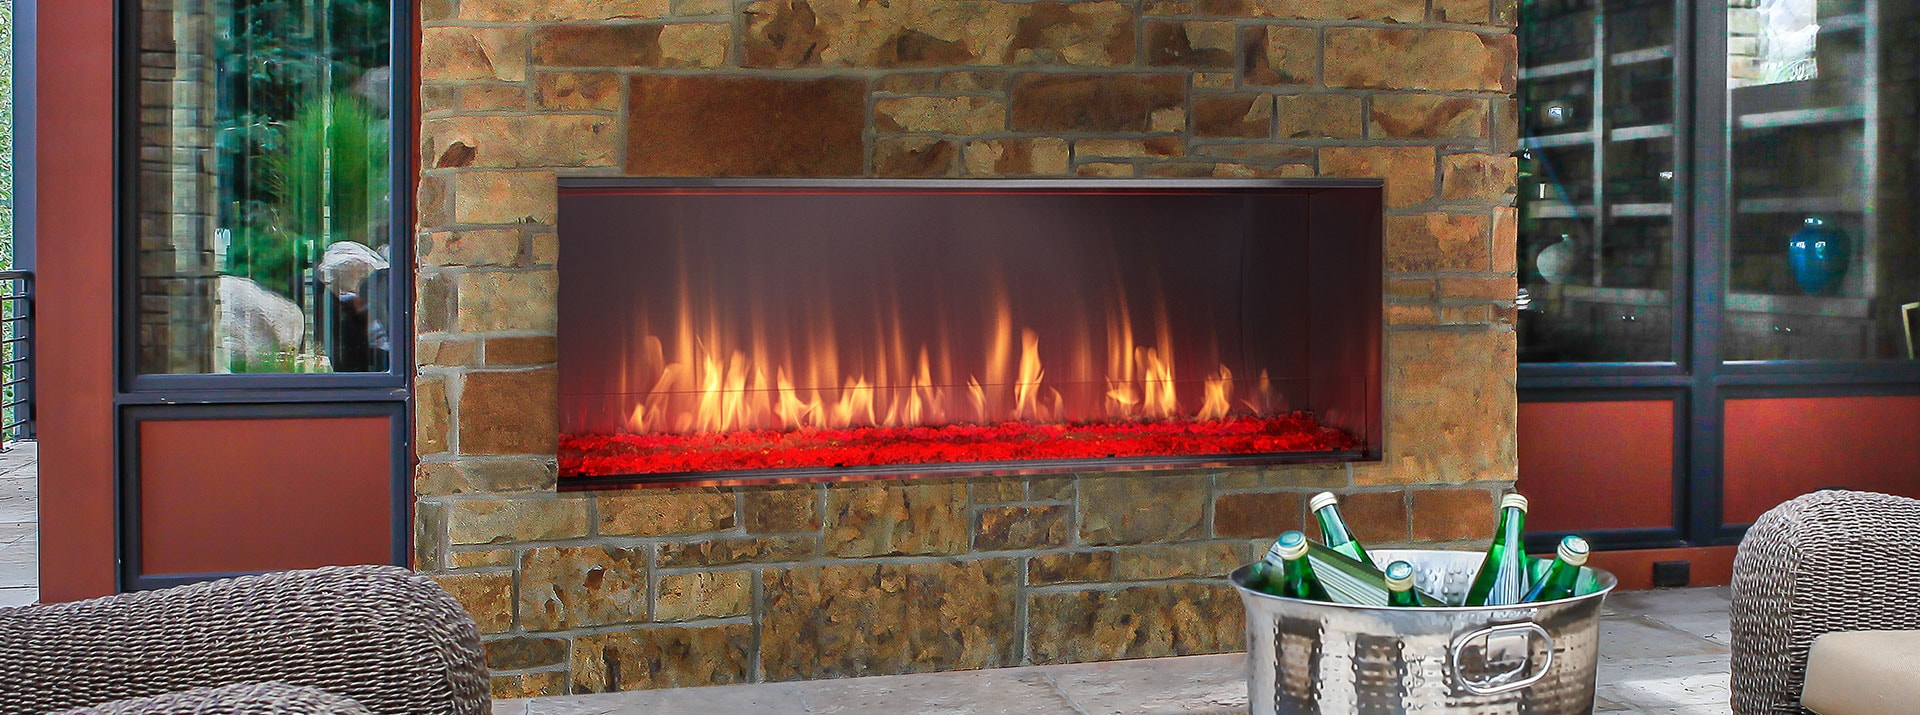 Where to Buy Fireplace Inserts Elegant Lanai Gas Outdoor Fireplace